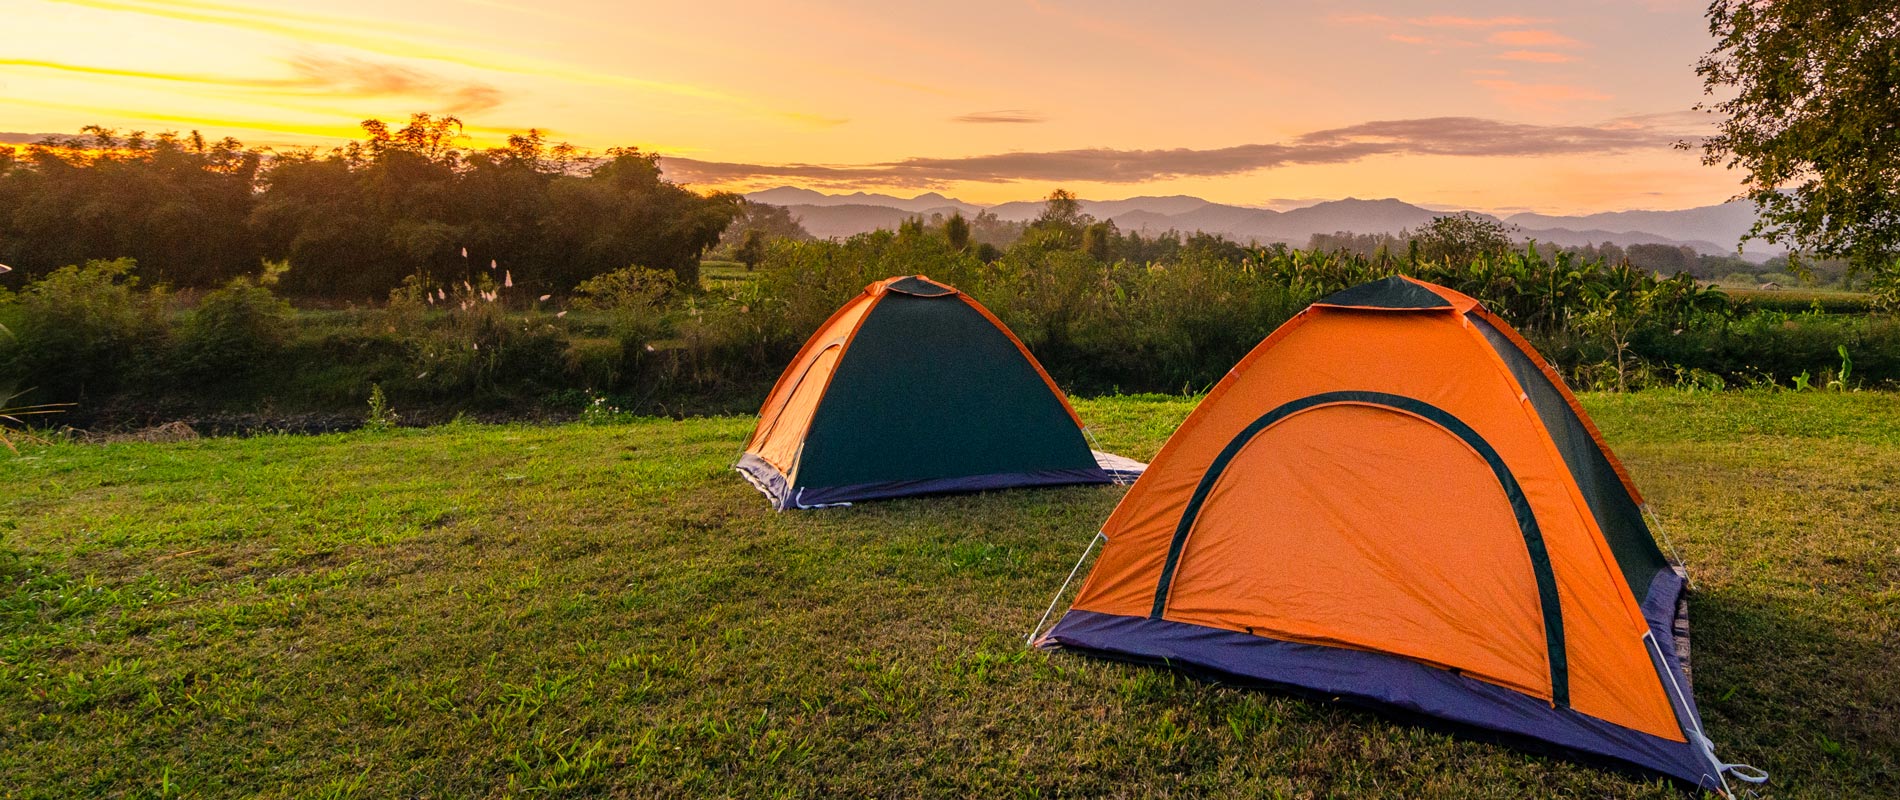 How to have a successful summer camping trip | Experience Freedom